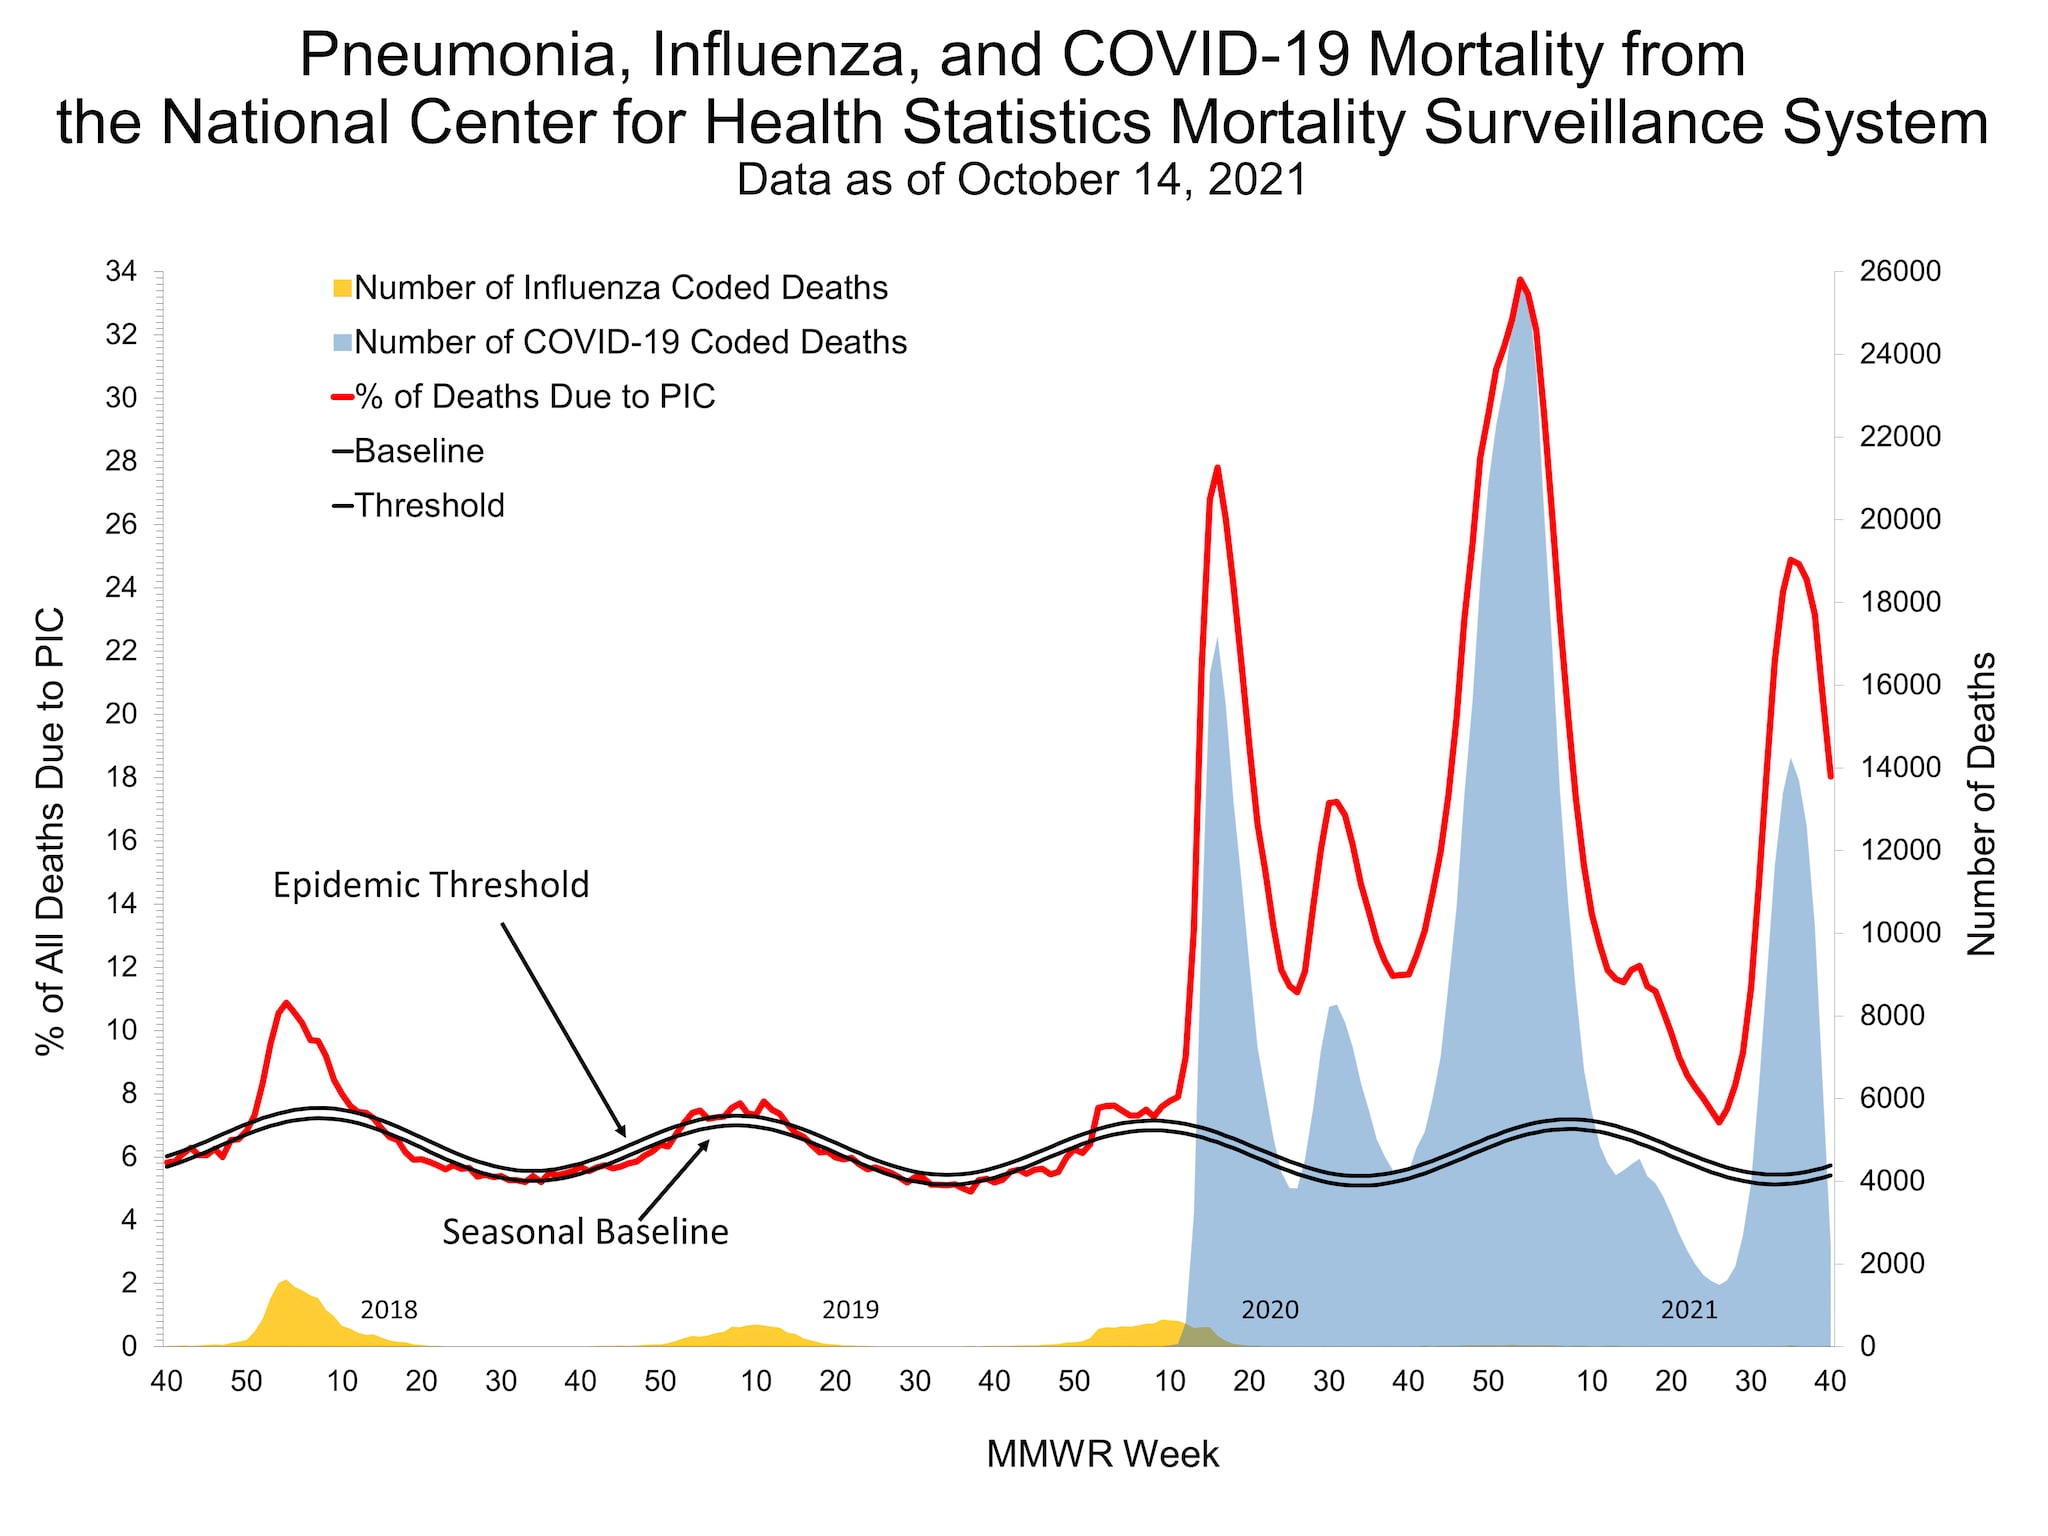 Pneumonia and Influenza Mortality for NCHS Mortality Surveillance